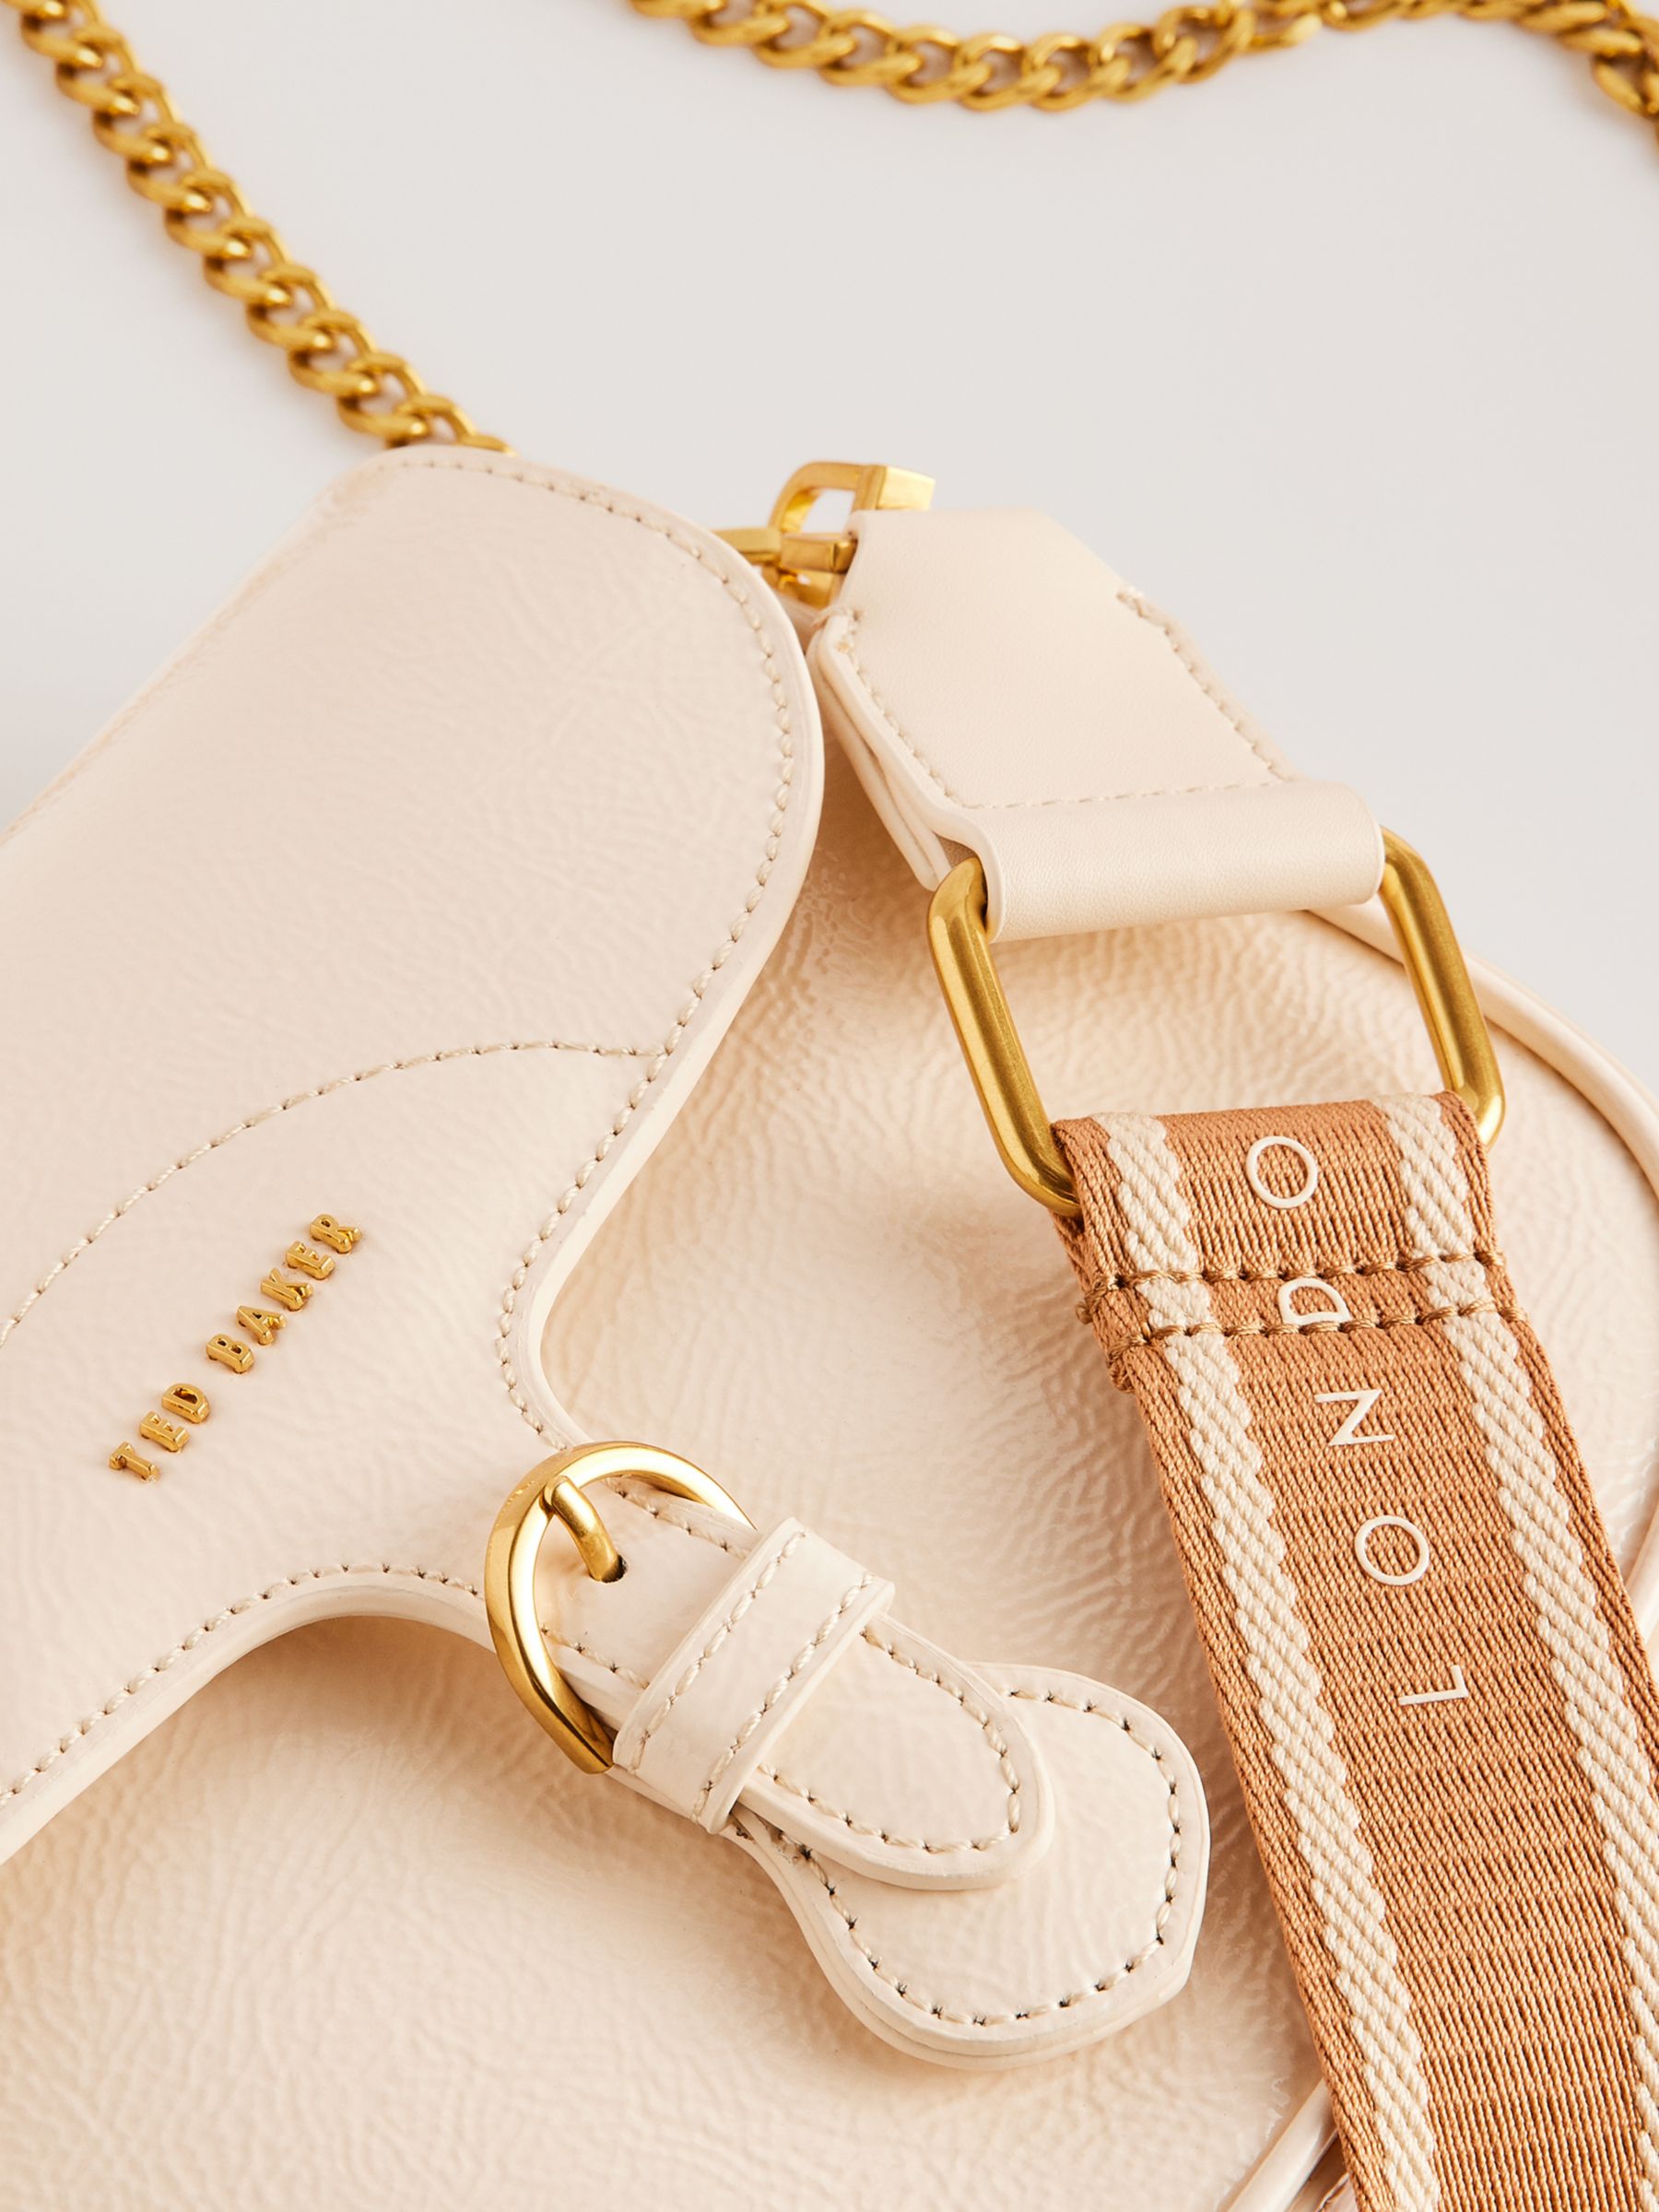 Buy Ted Baker Esia Leather Cross Body Saddle Bag Online at johnlewis.com